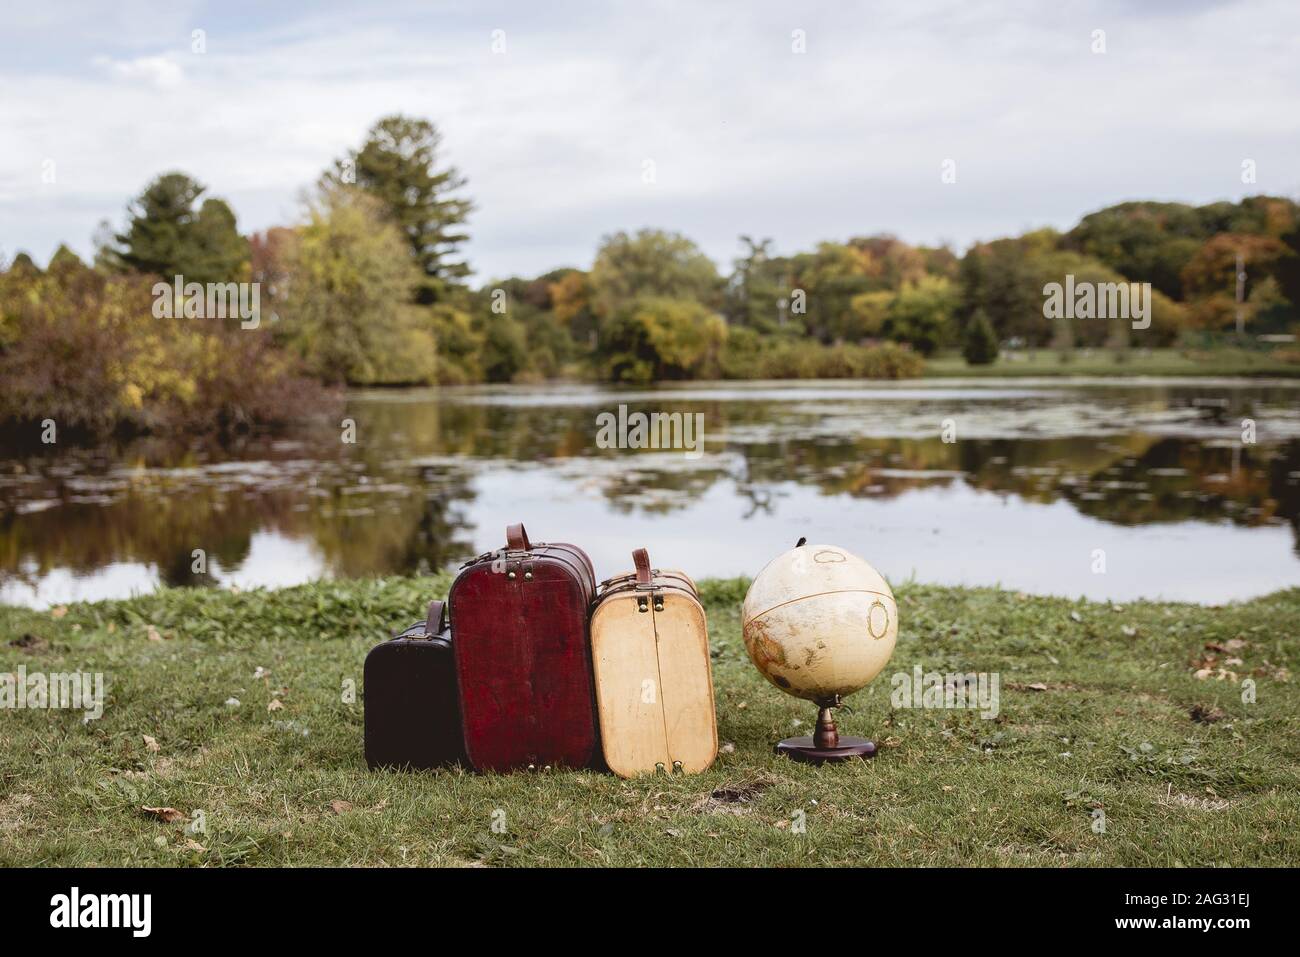 Closeup shot of old suitcases on a grassy field near desk globe with blurred water in background Stock Photo